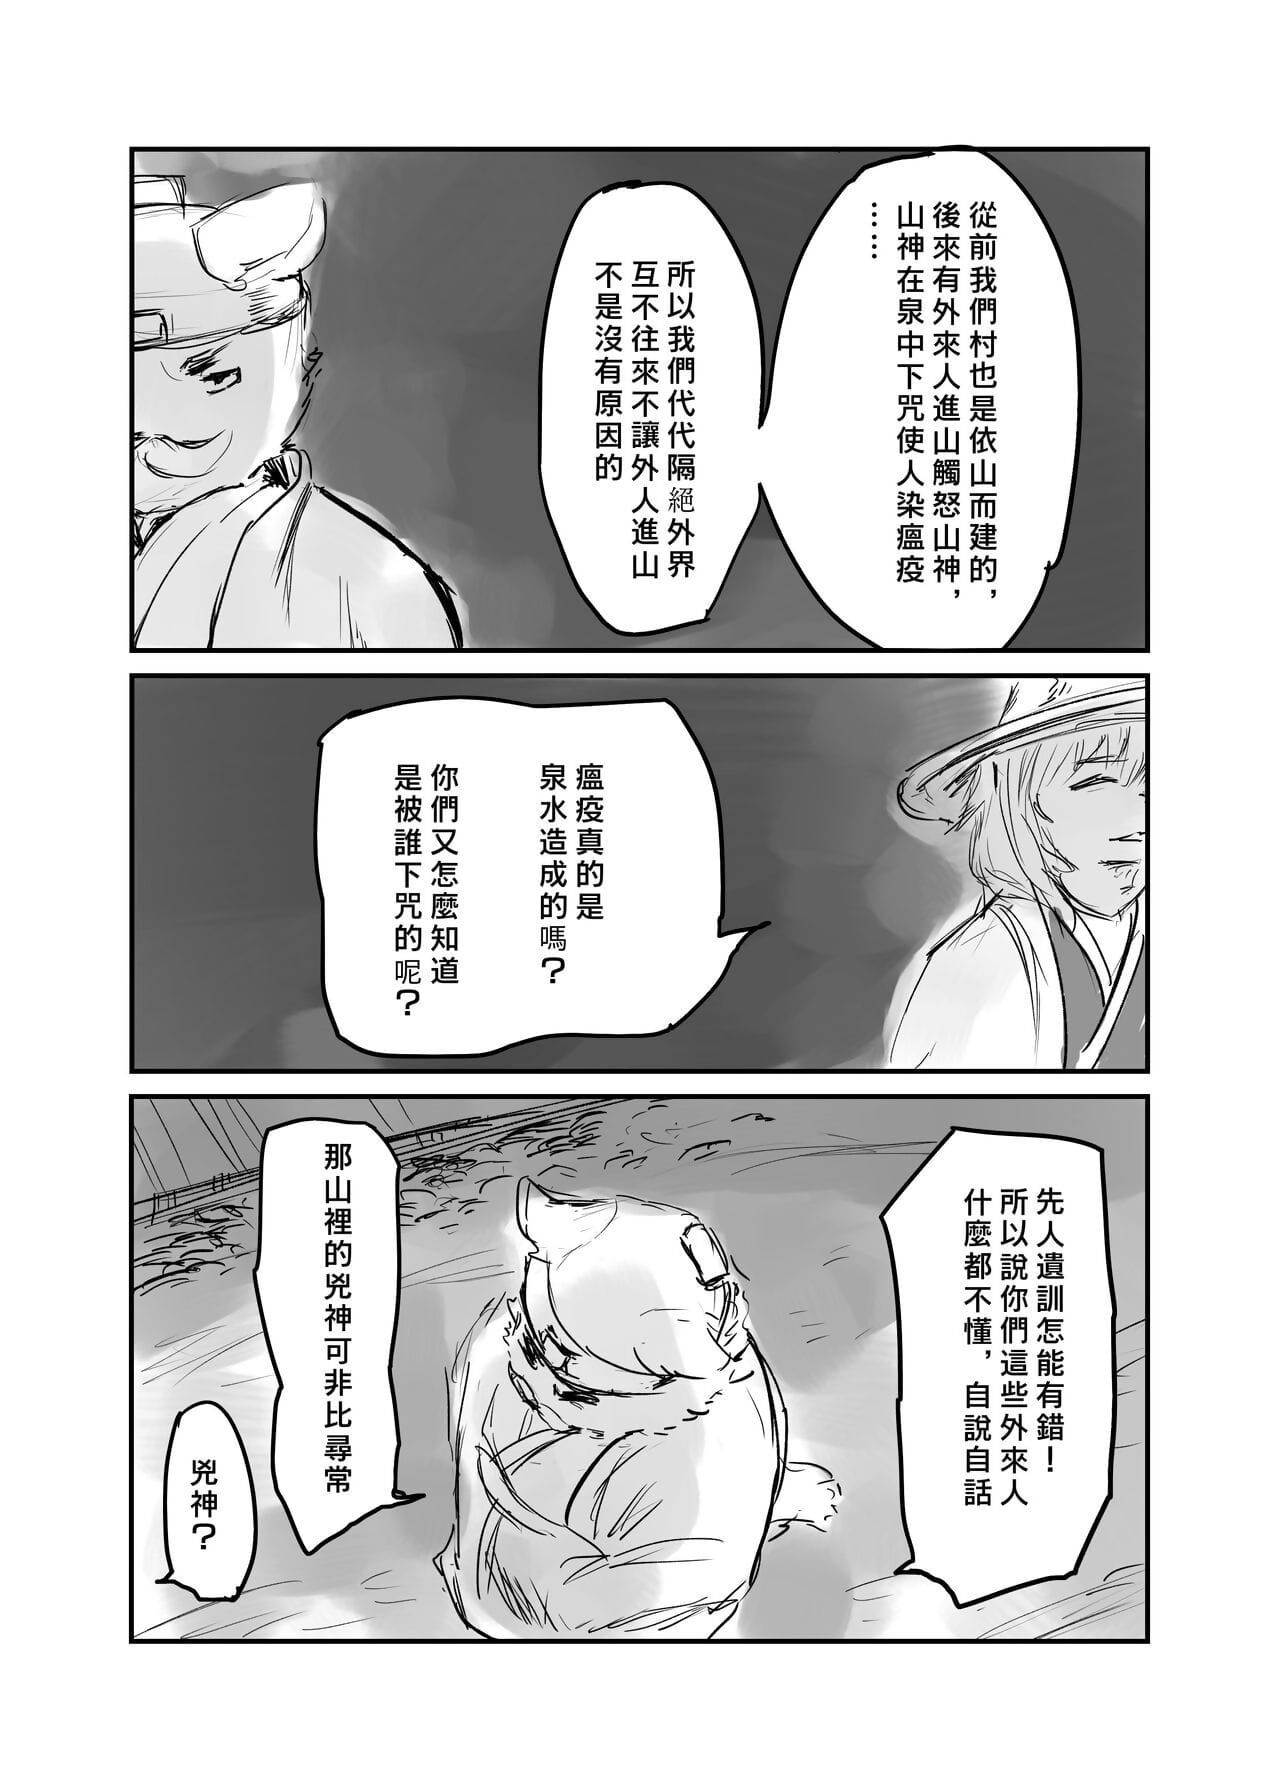 （The visitor 他乡之人 by：鬼流 page 1